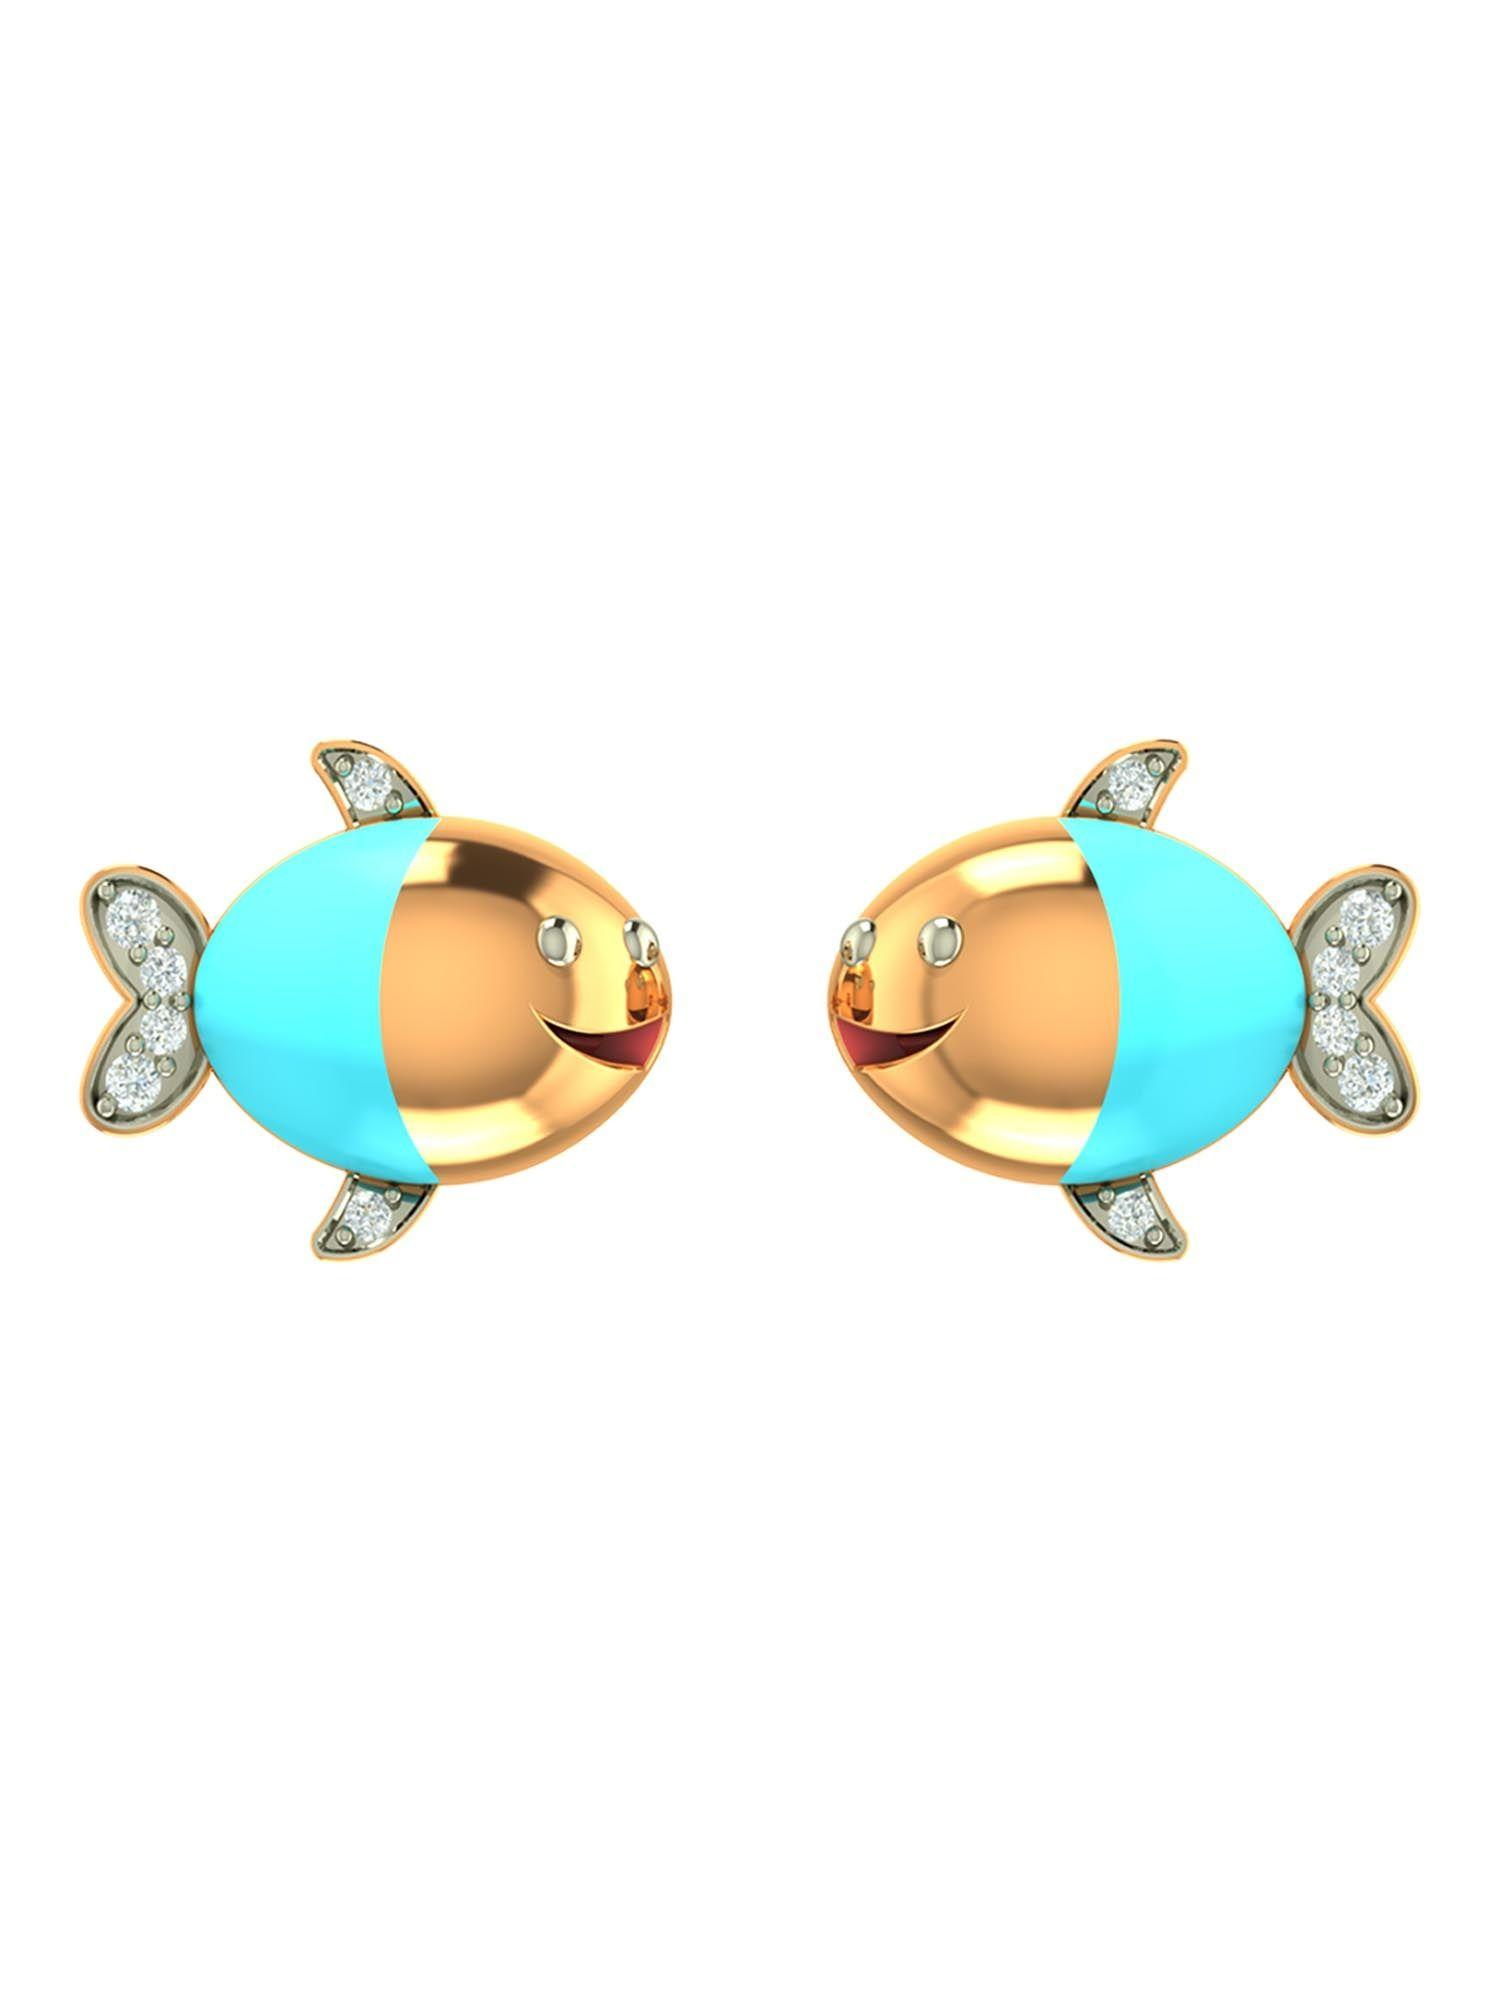 fish-design-stud-gold-earrings-with-gold-screw